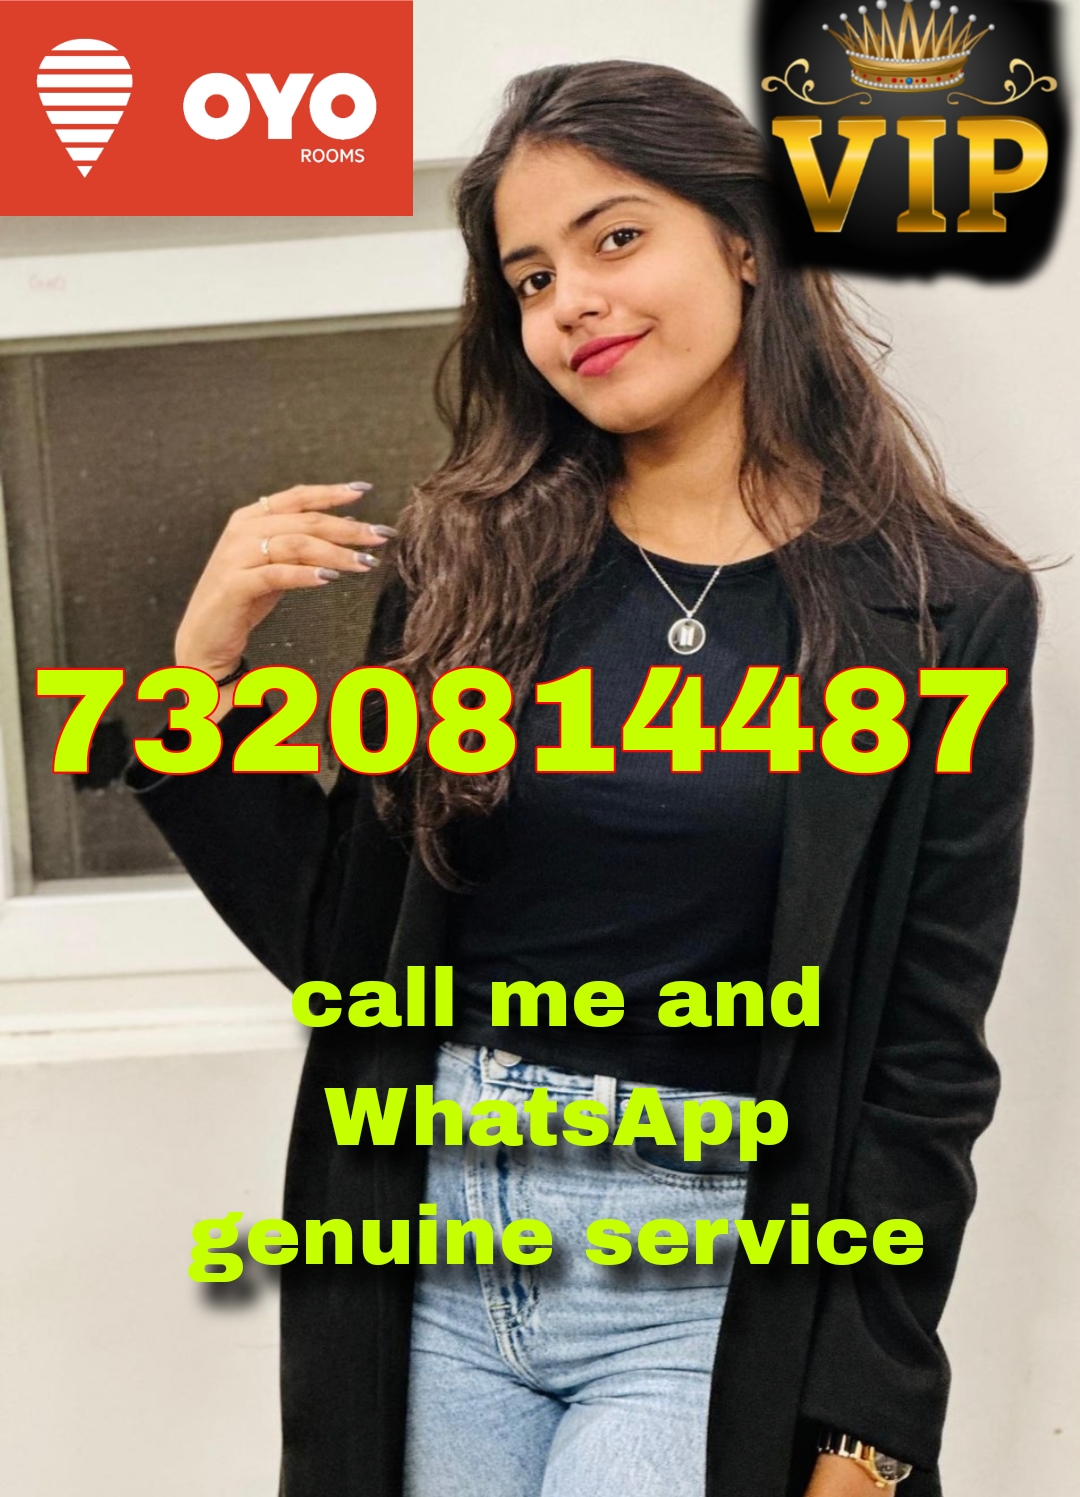 AMRAWATI HOTELS SERVICE UNLIMITED SHOTS VIP TOP MODEL AVAILABLE INDEPE